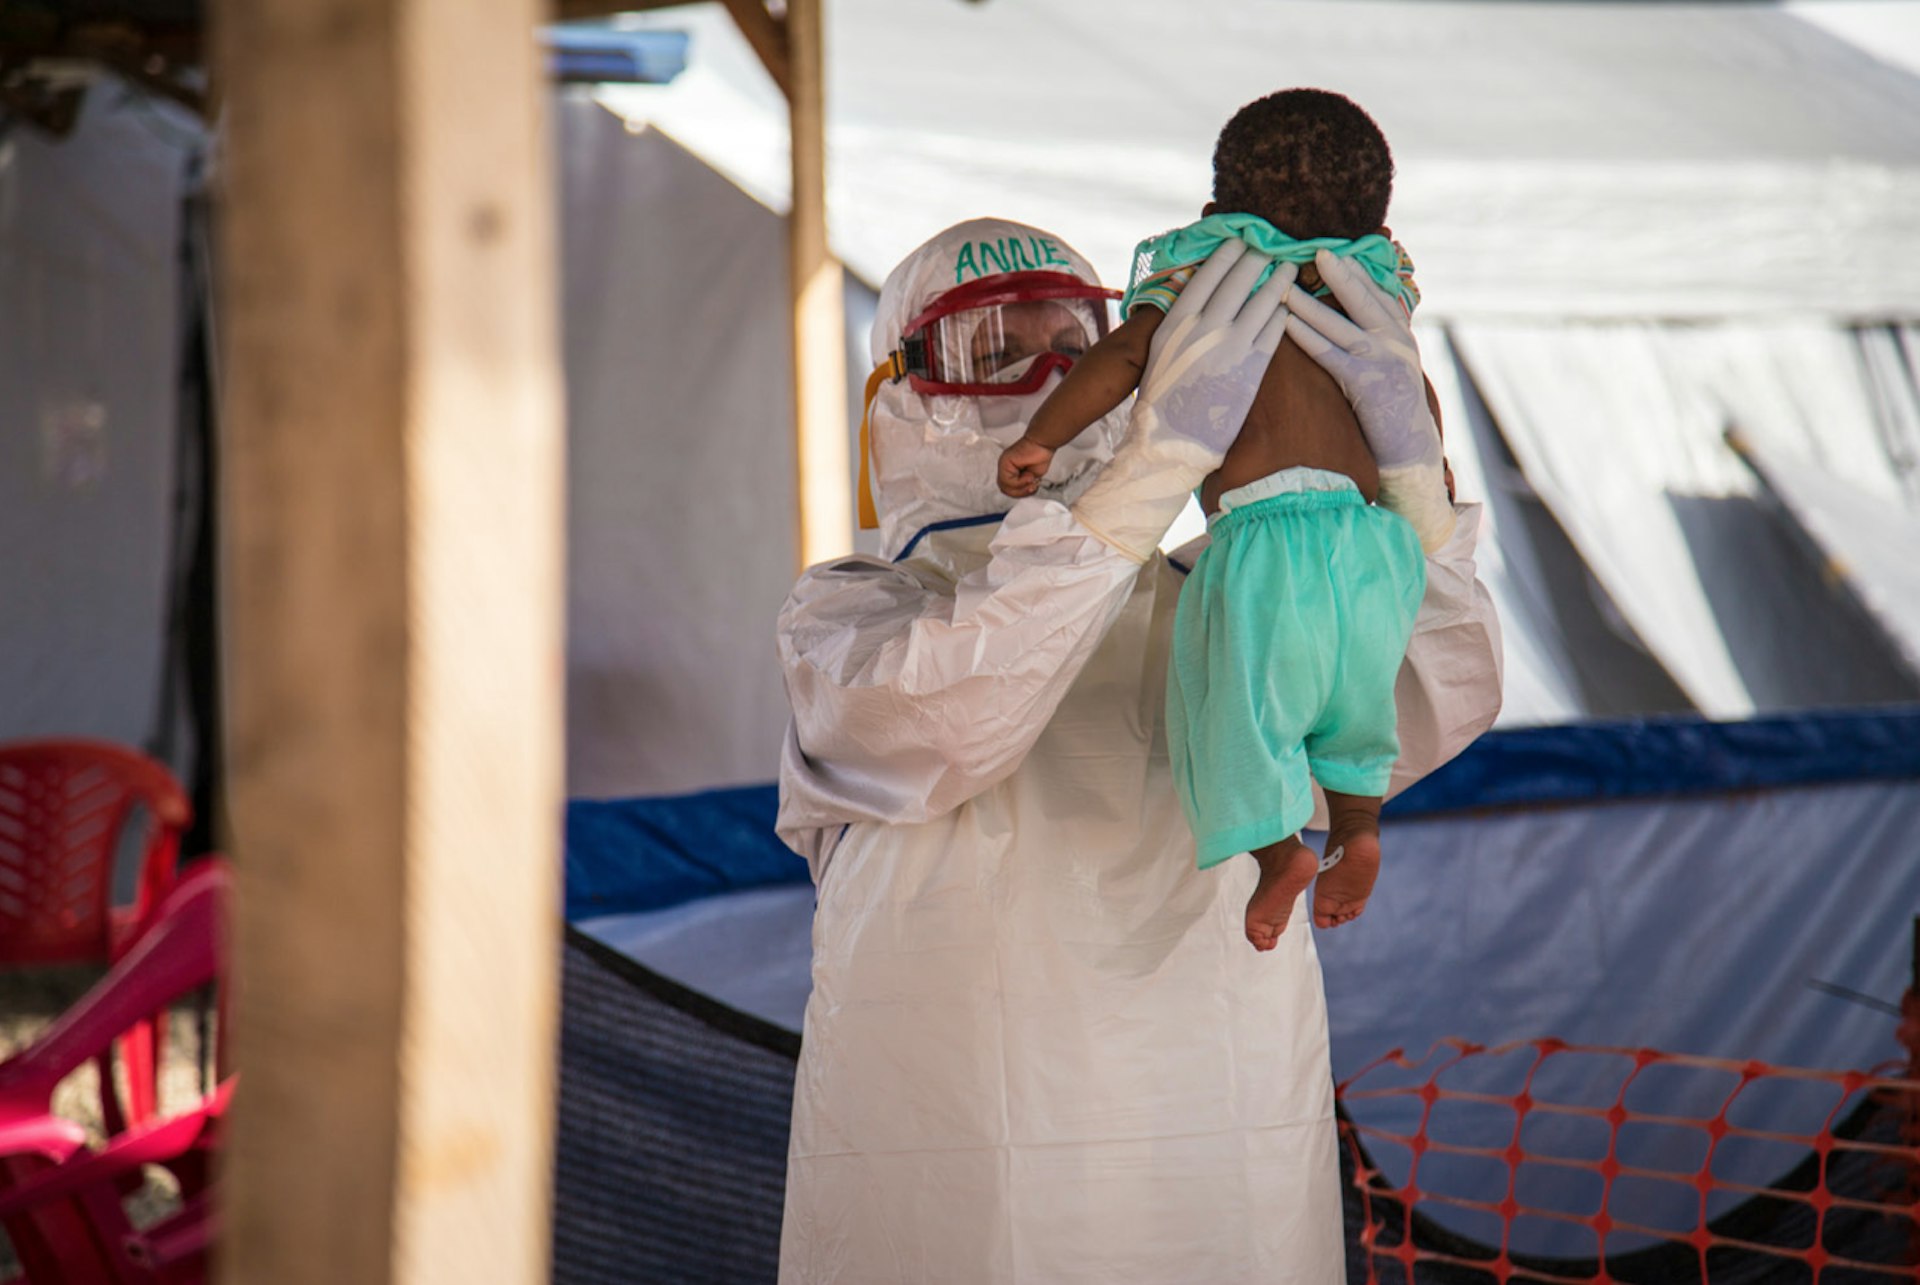 A personal account of living with Ebola in Sierra Leone